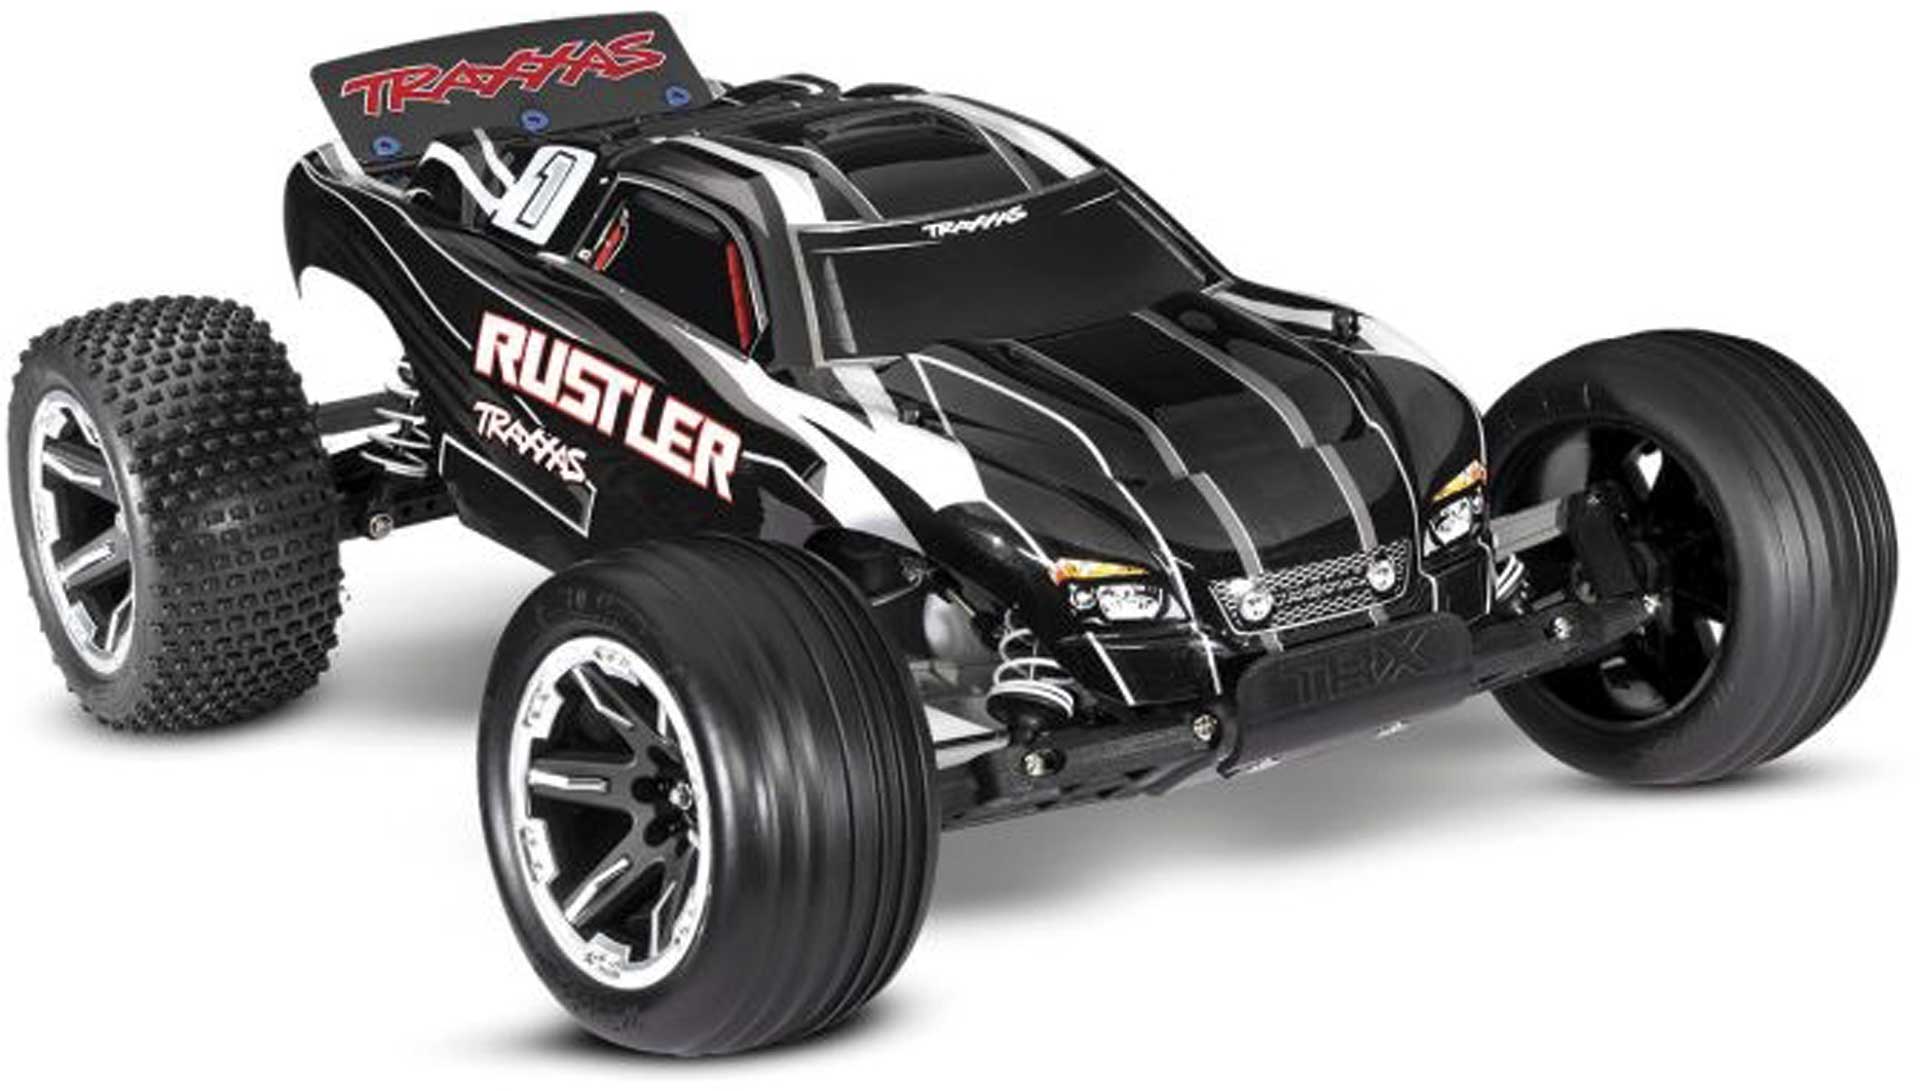 TRAXXAS RUSTLER BLACK 1/10 2WD STADIUM-TRUCK RTR BRUSHED, WITH BATTERY AND 4AMP USB-C CHARGER